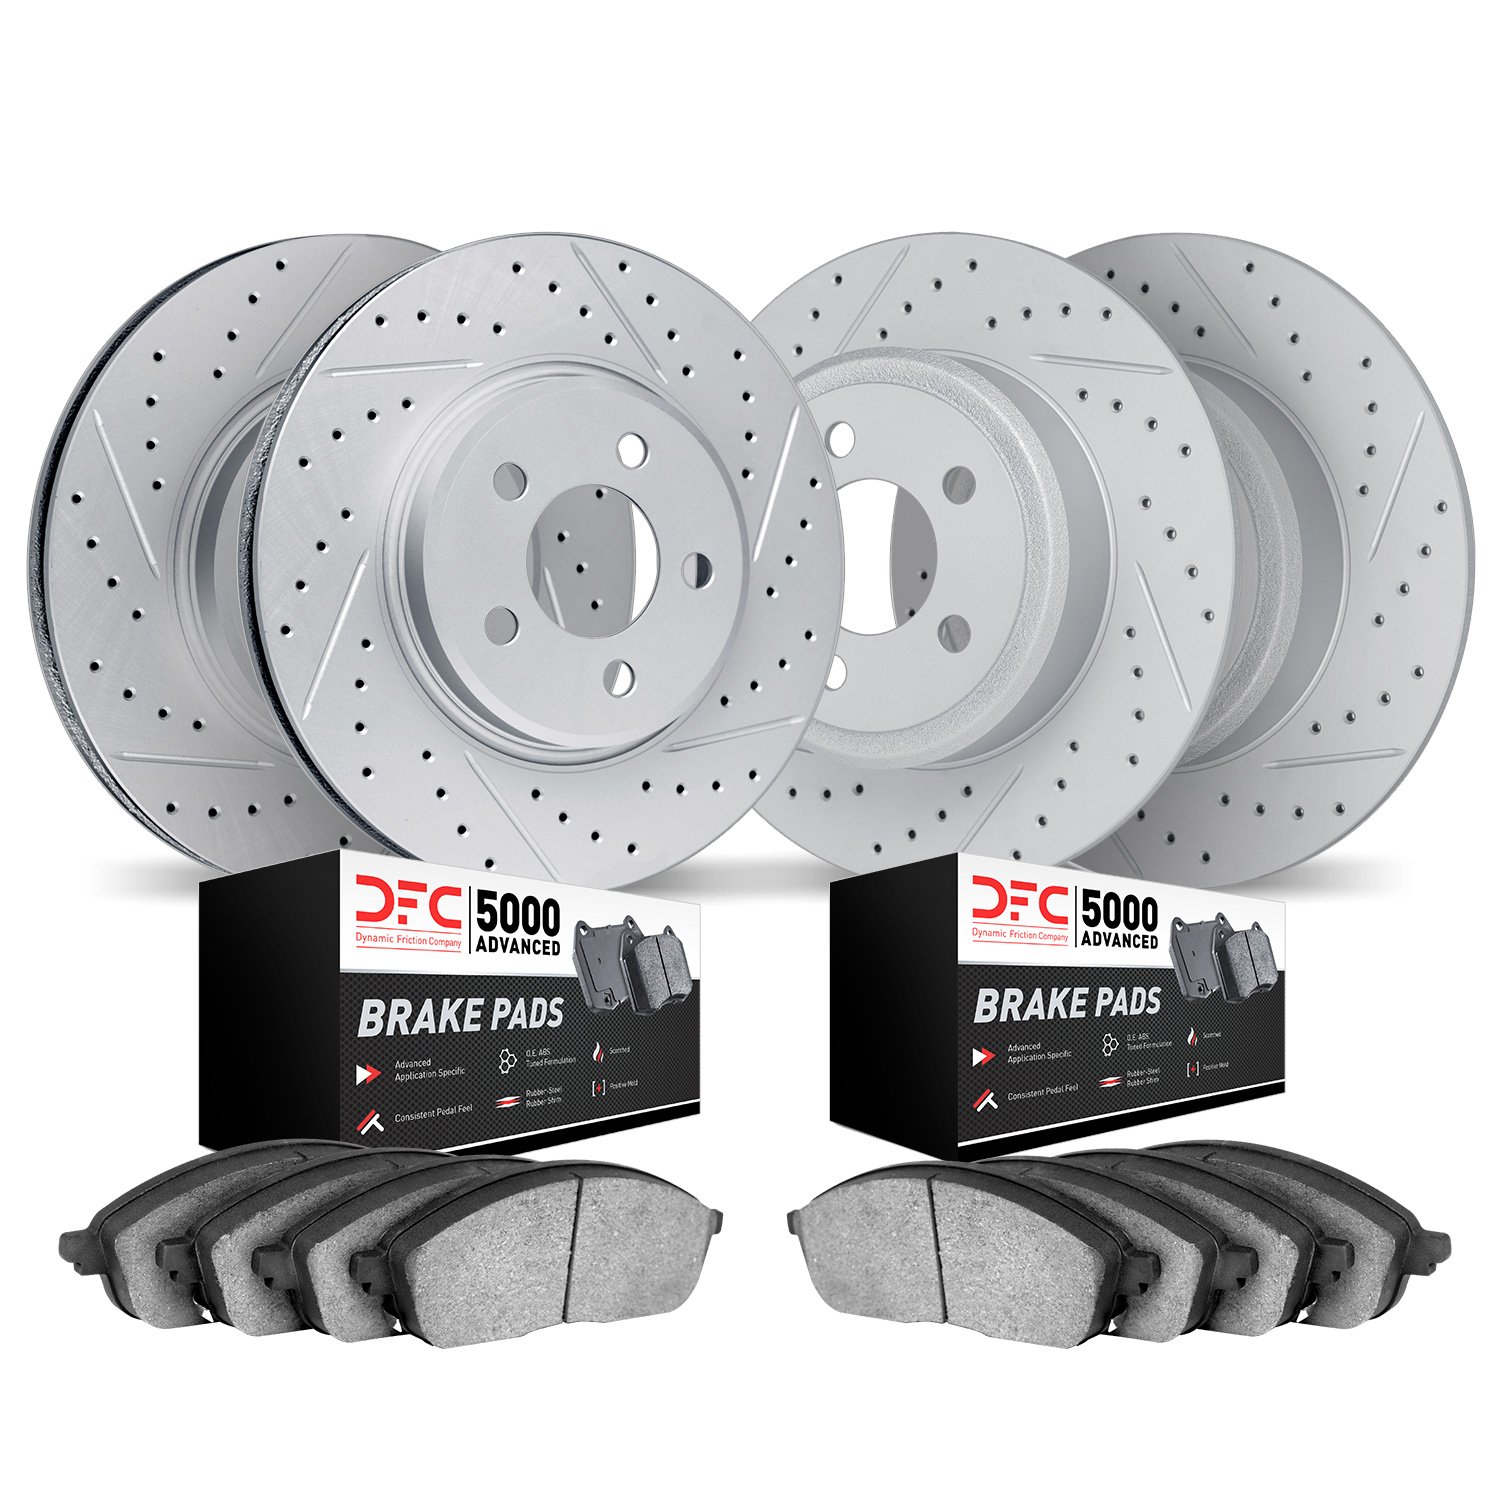 2504-76085 Geoperformance Drilled/Slotted Rotors w/5000 Advanced Brake Pads Kit, 1995-1997 Lexus/Toyota/Scion, Position: Front a